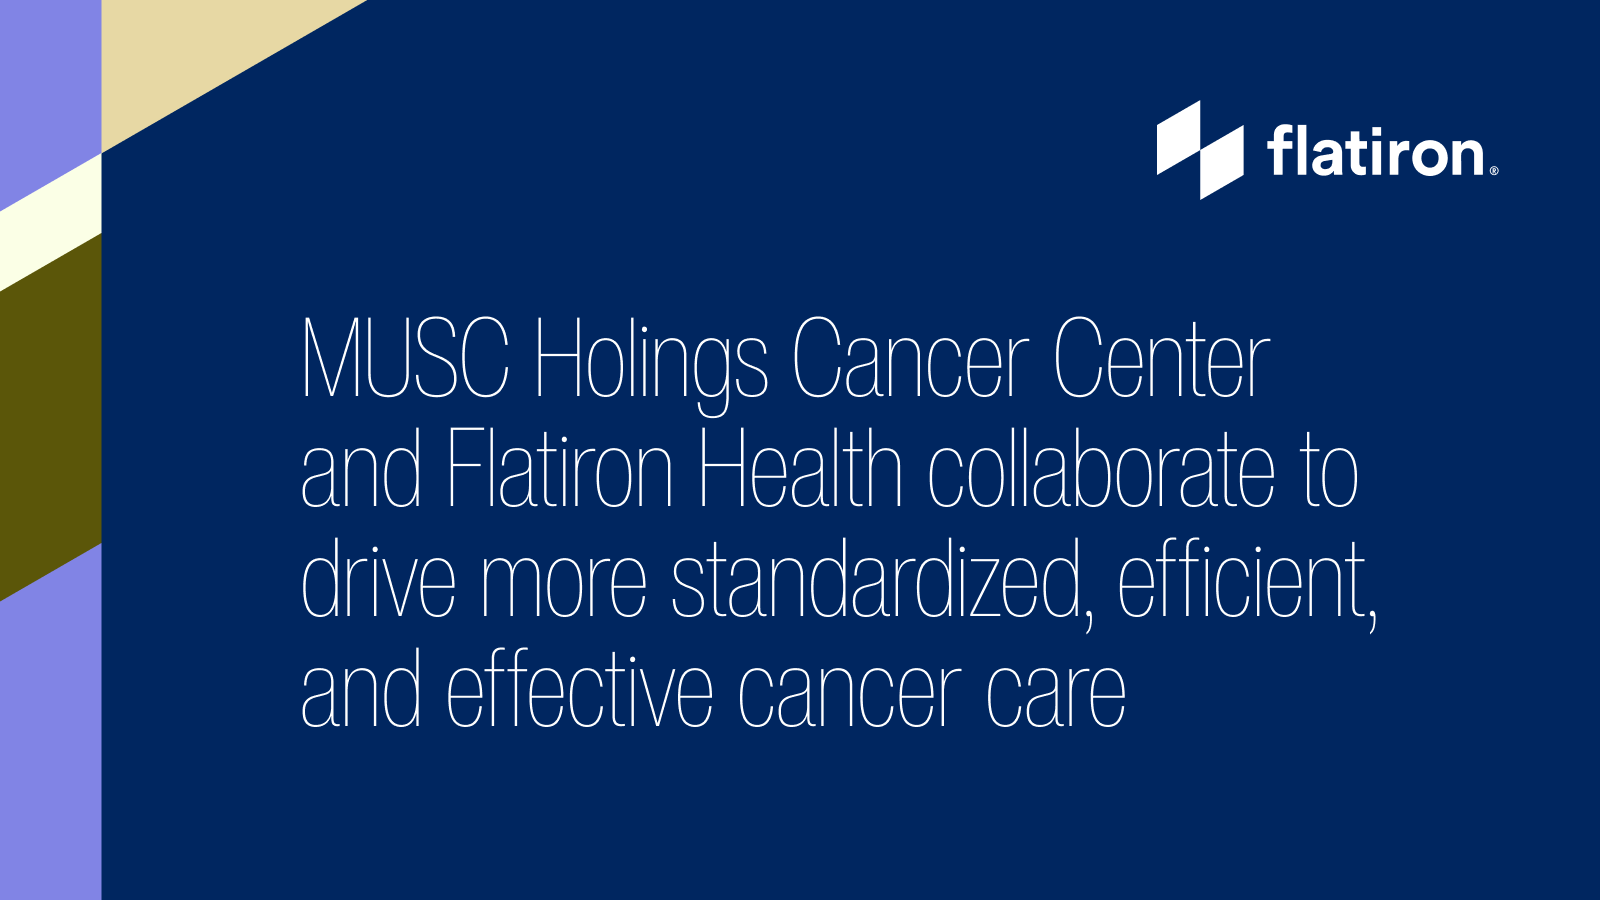 The Medical University of South Carolina and Flatiron Health announce collaboration to drive more standardized, efficient, and effective cancer care